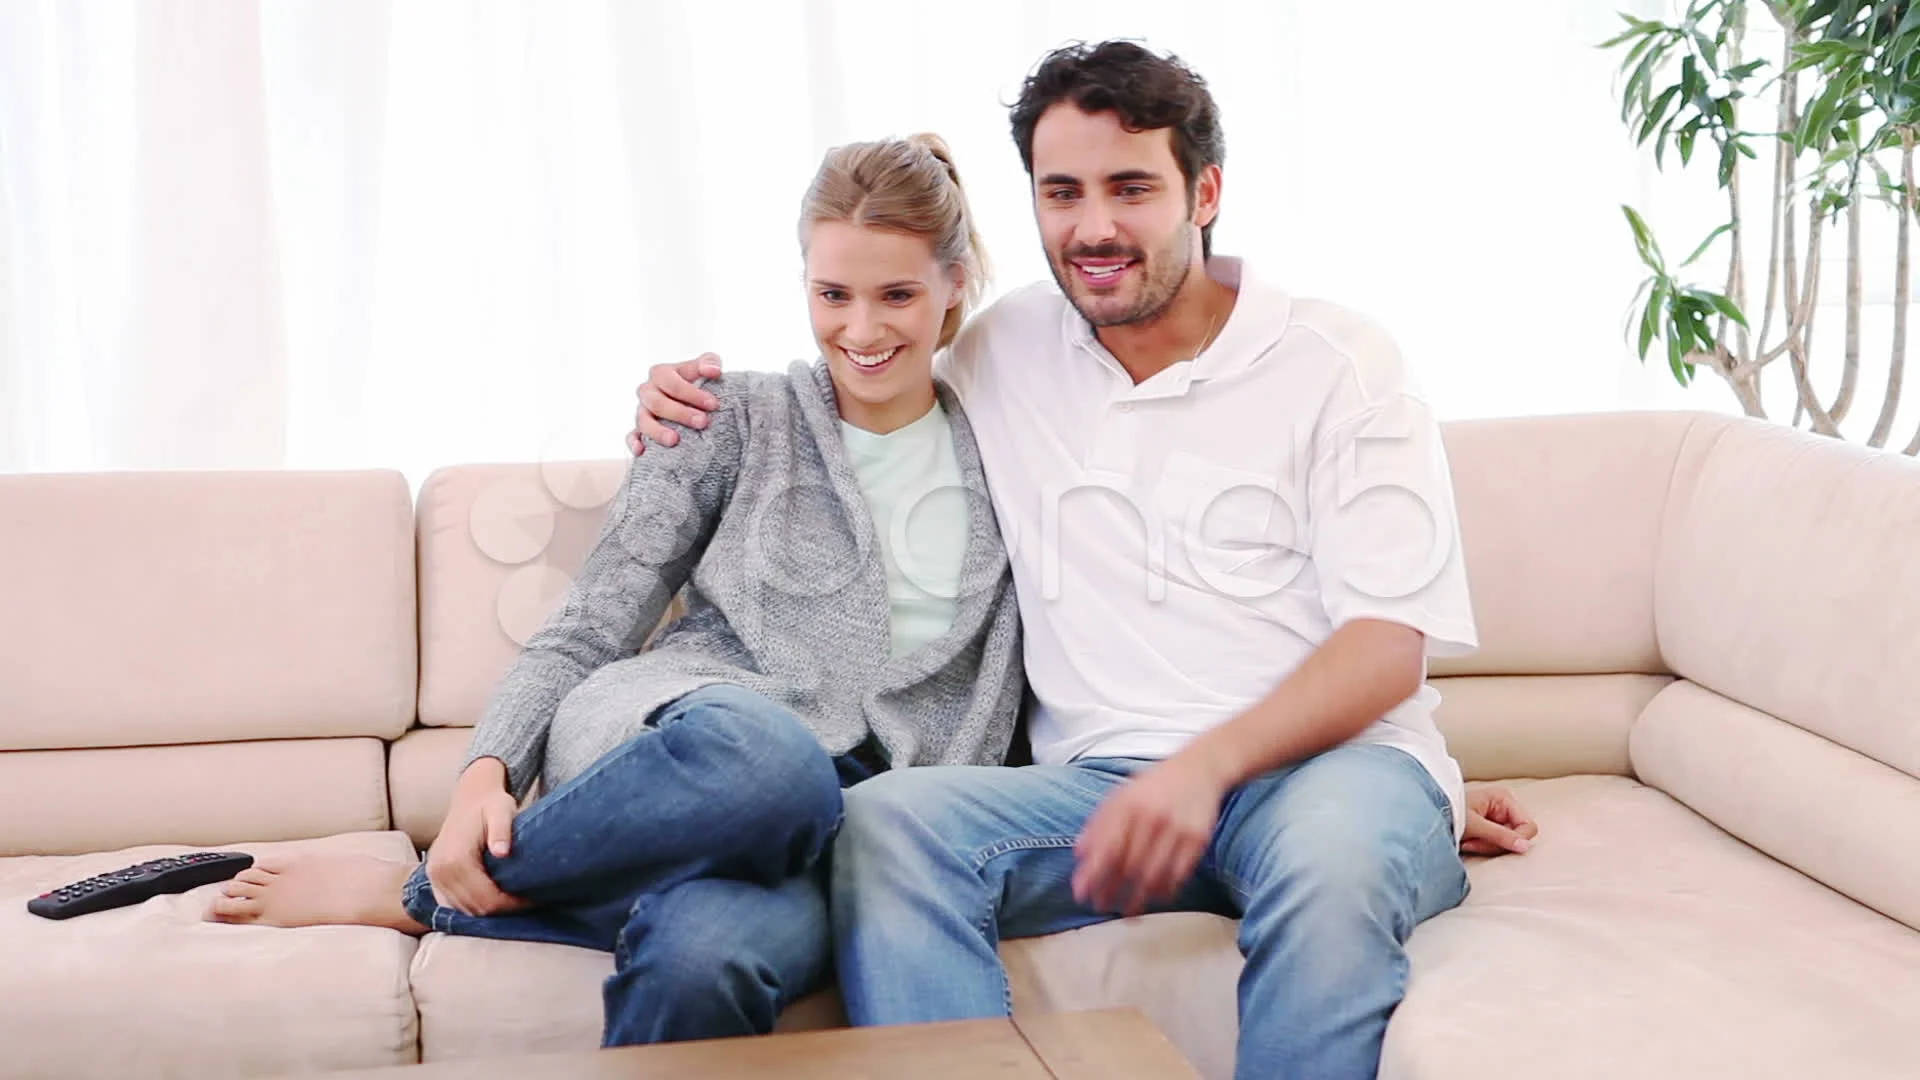 smiling-couple-sitting-couch-while-footage-010843617_prevstill.jpeg